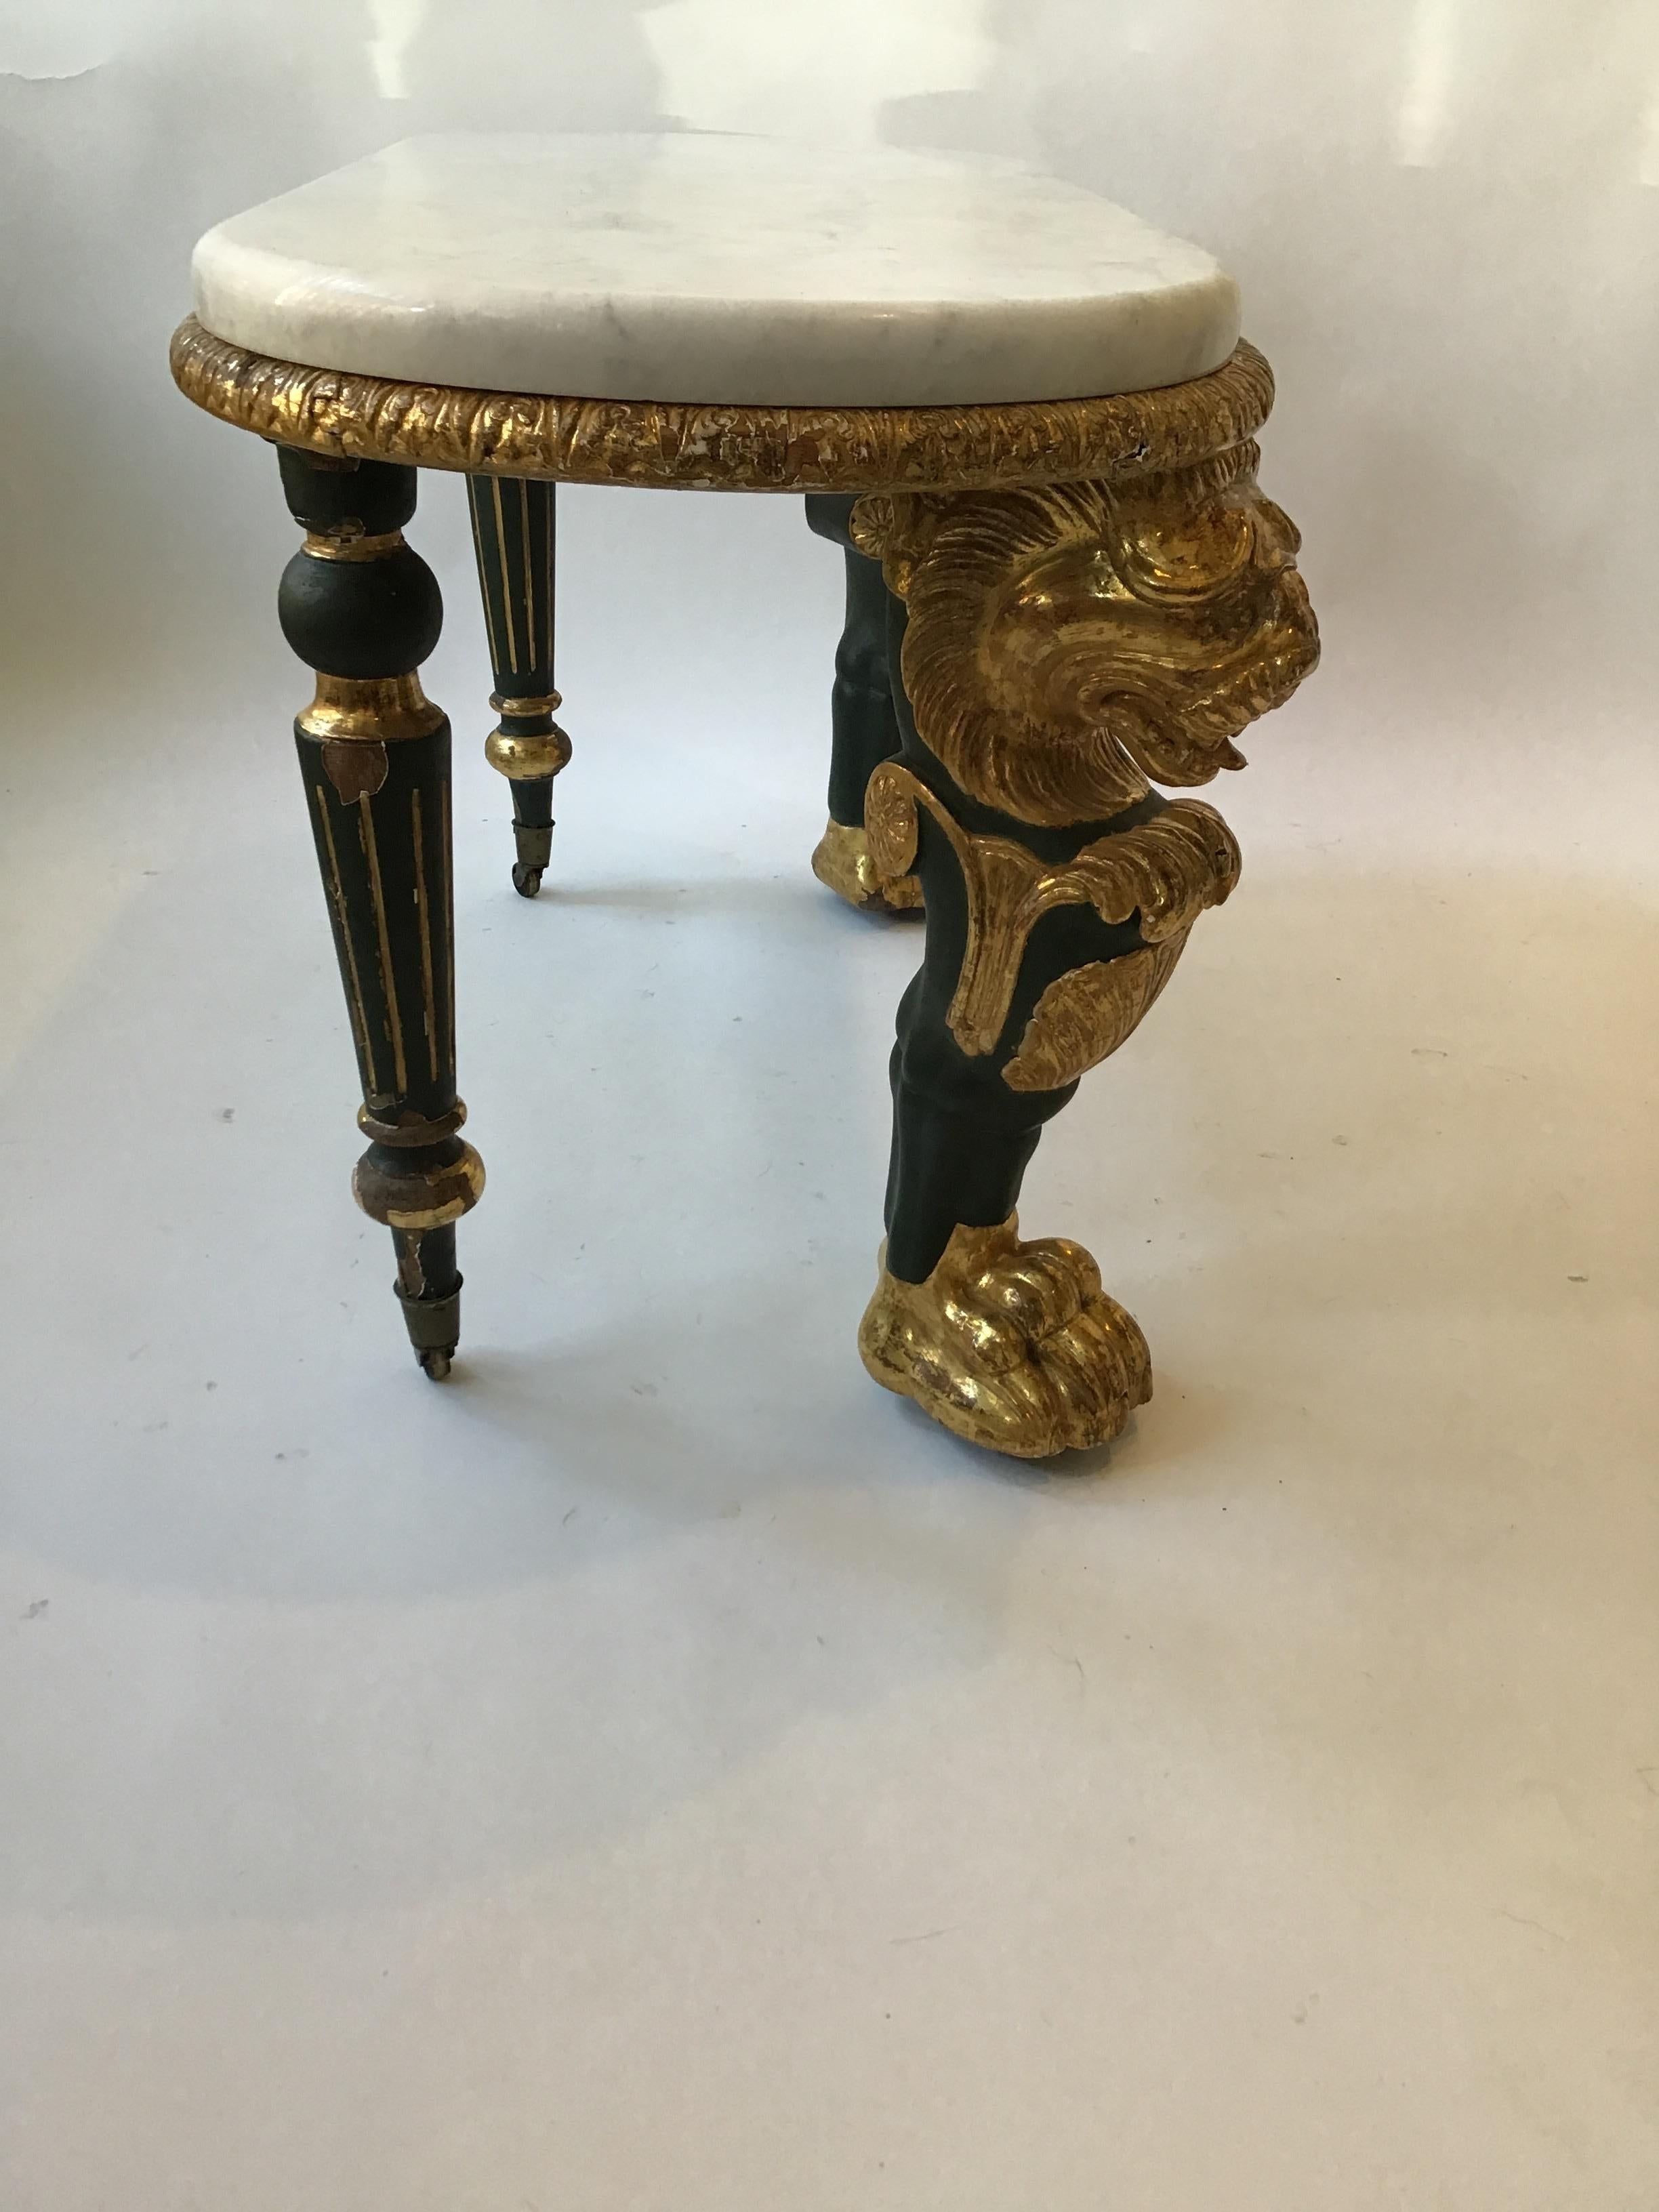 1880s French Gilt Lion Table with Marble Top For Sale 7